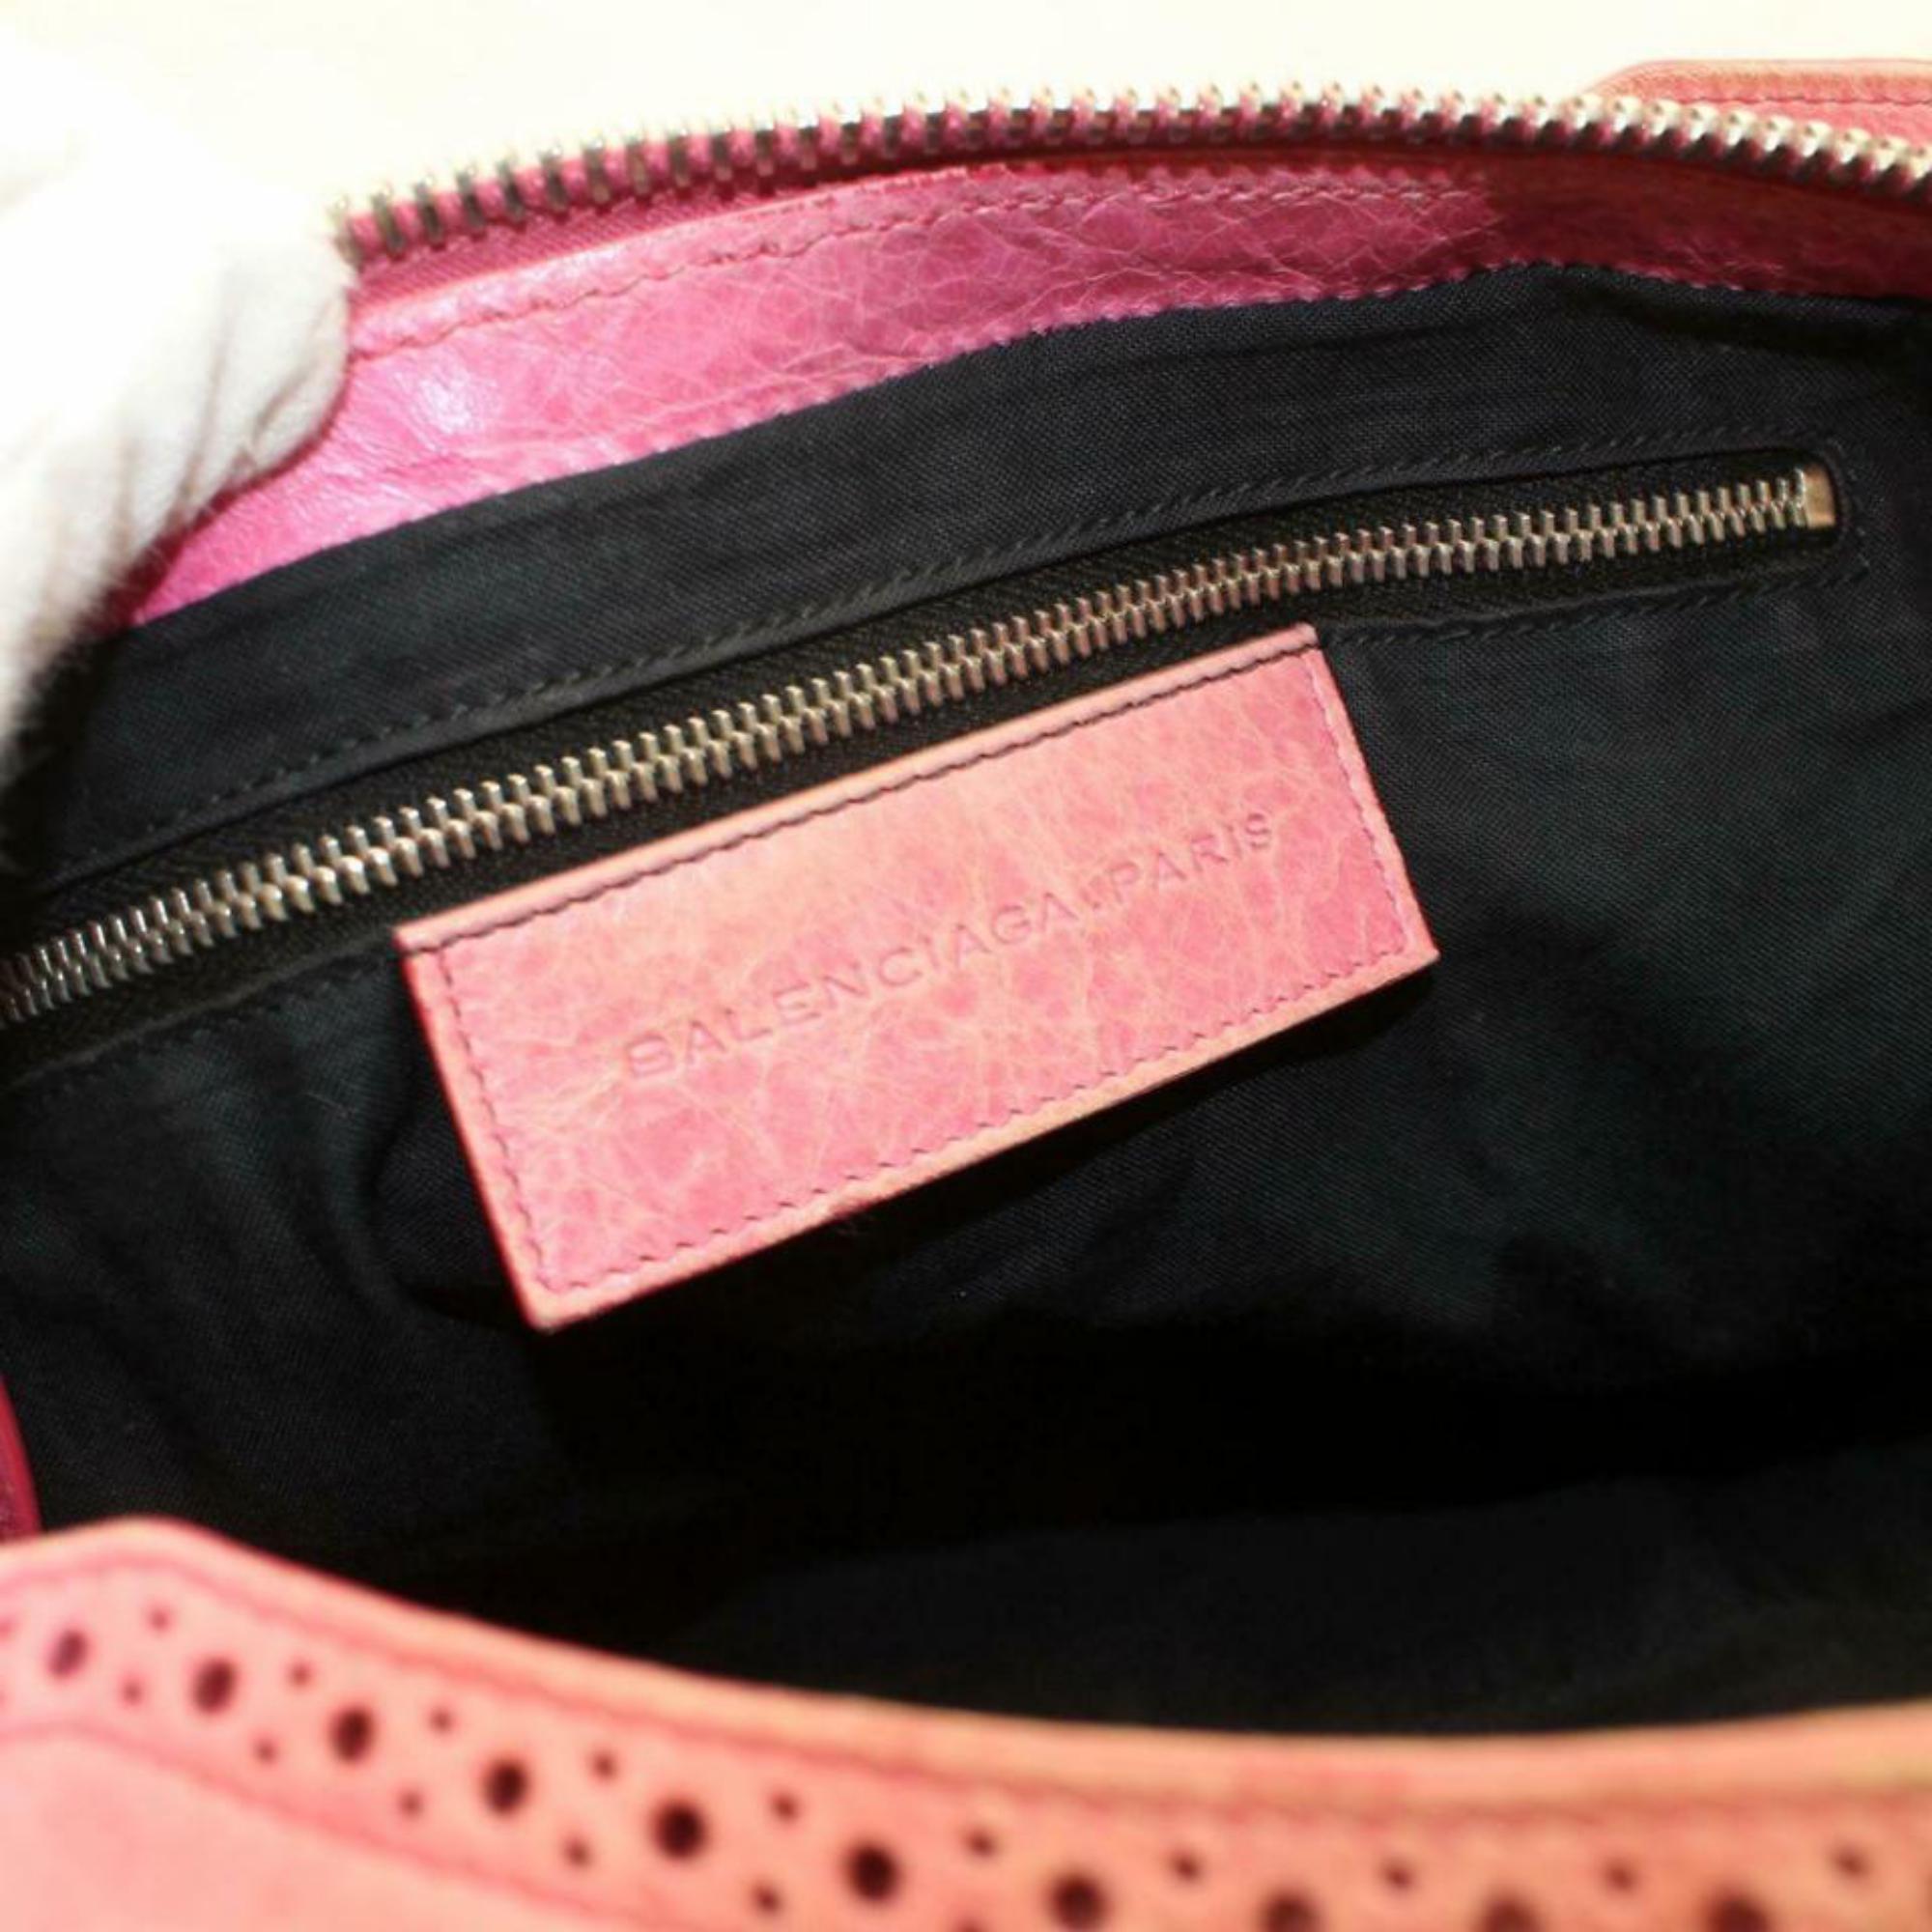 Balenciaga Oxford The City 2way 870151 Pink Leather Shoulder Bag In Good Condition For Sale In Forest Hills, NY